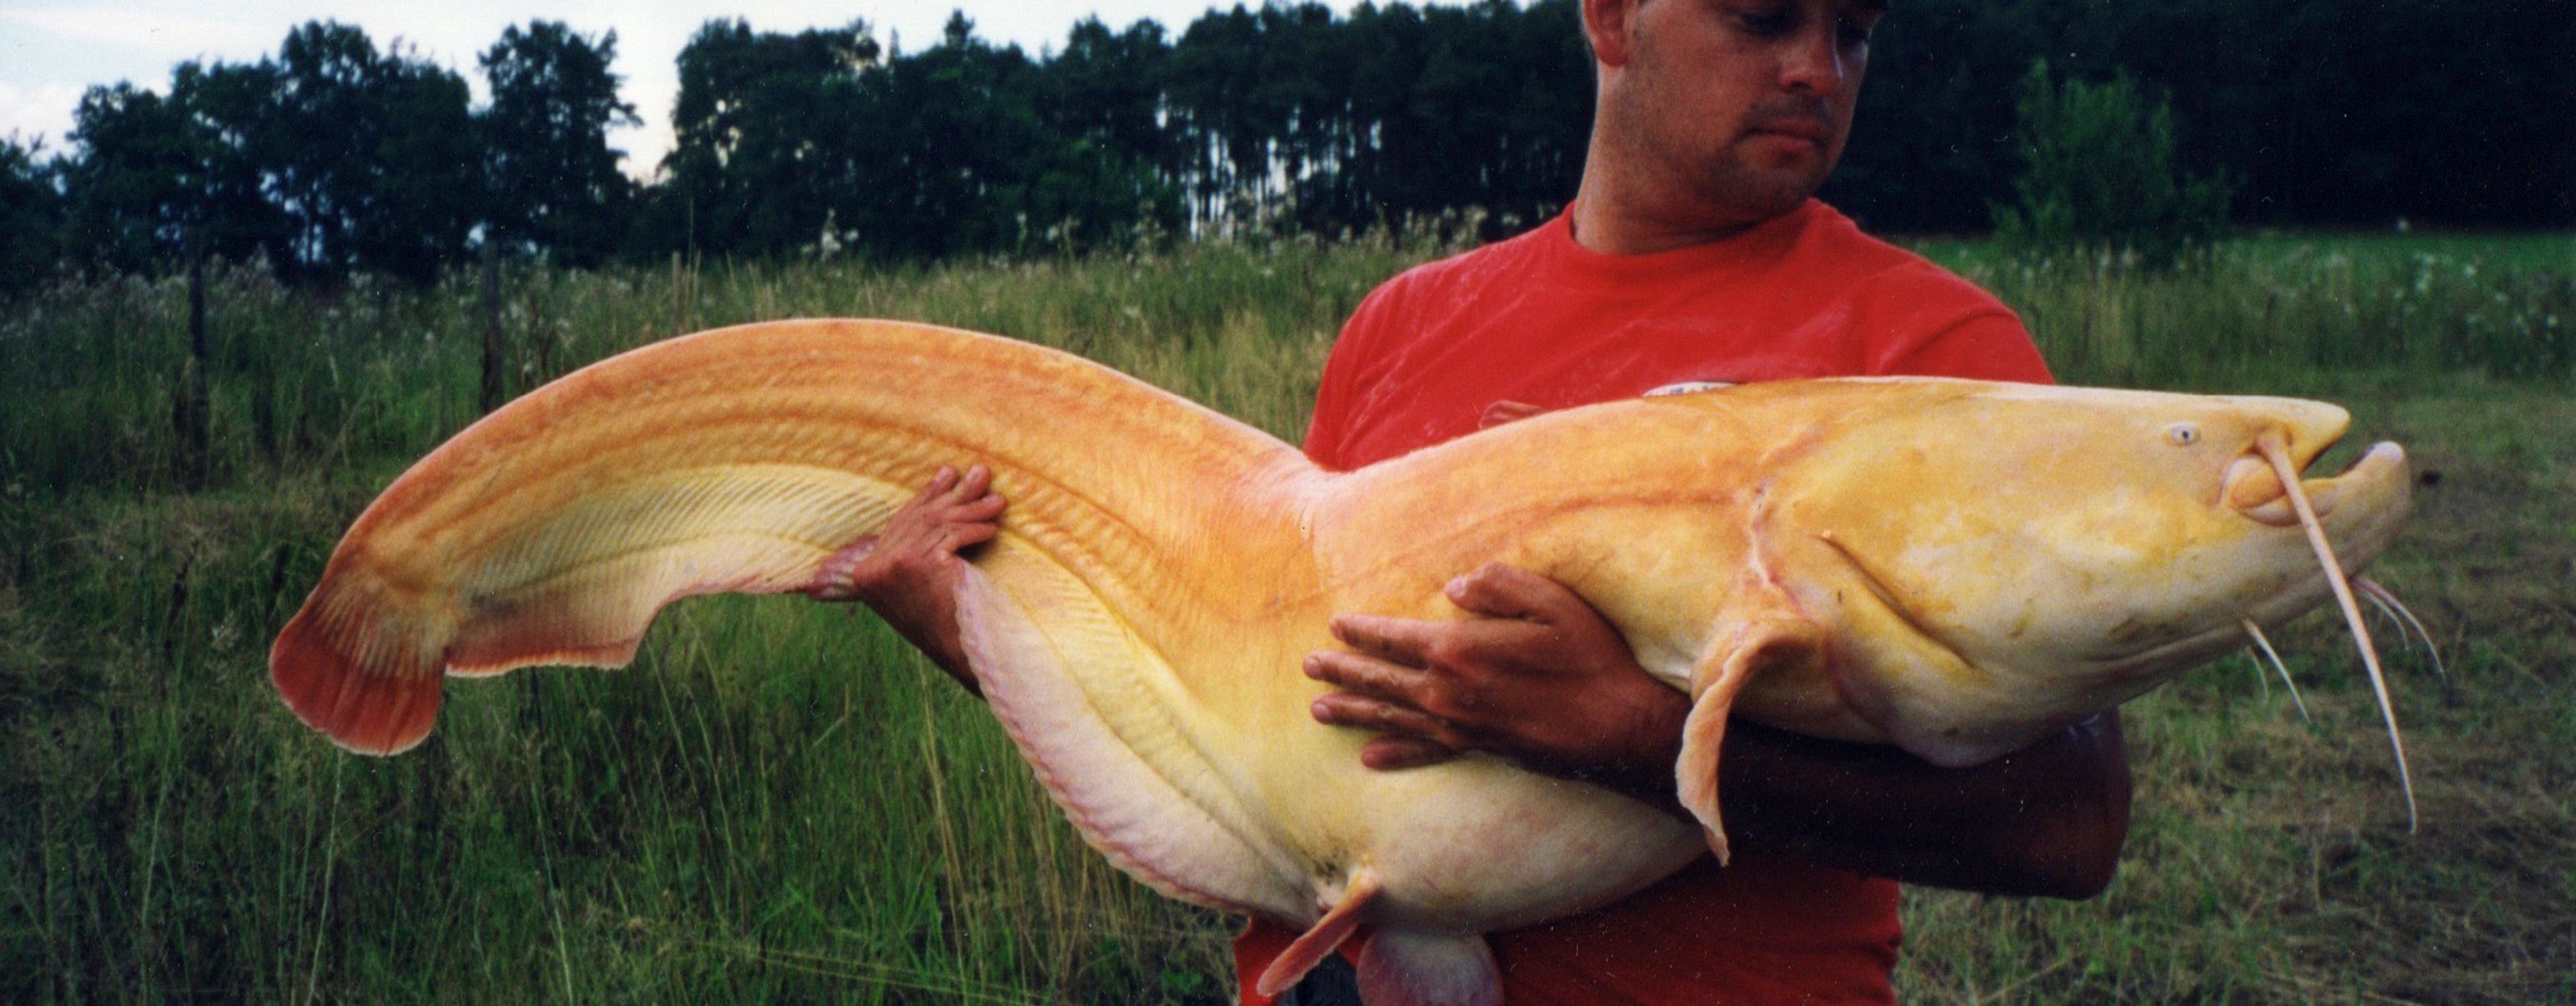 Fishery owner James Peacock holding a 61lb Albino Wels Catfish caught in Germany from Schnackensee Lake in Bavaria